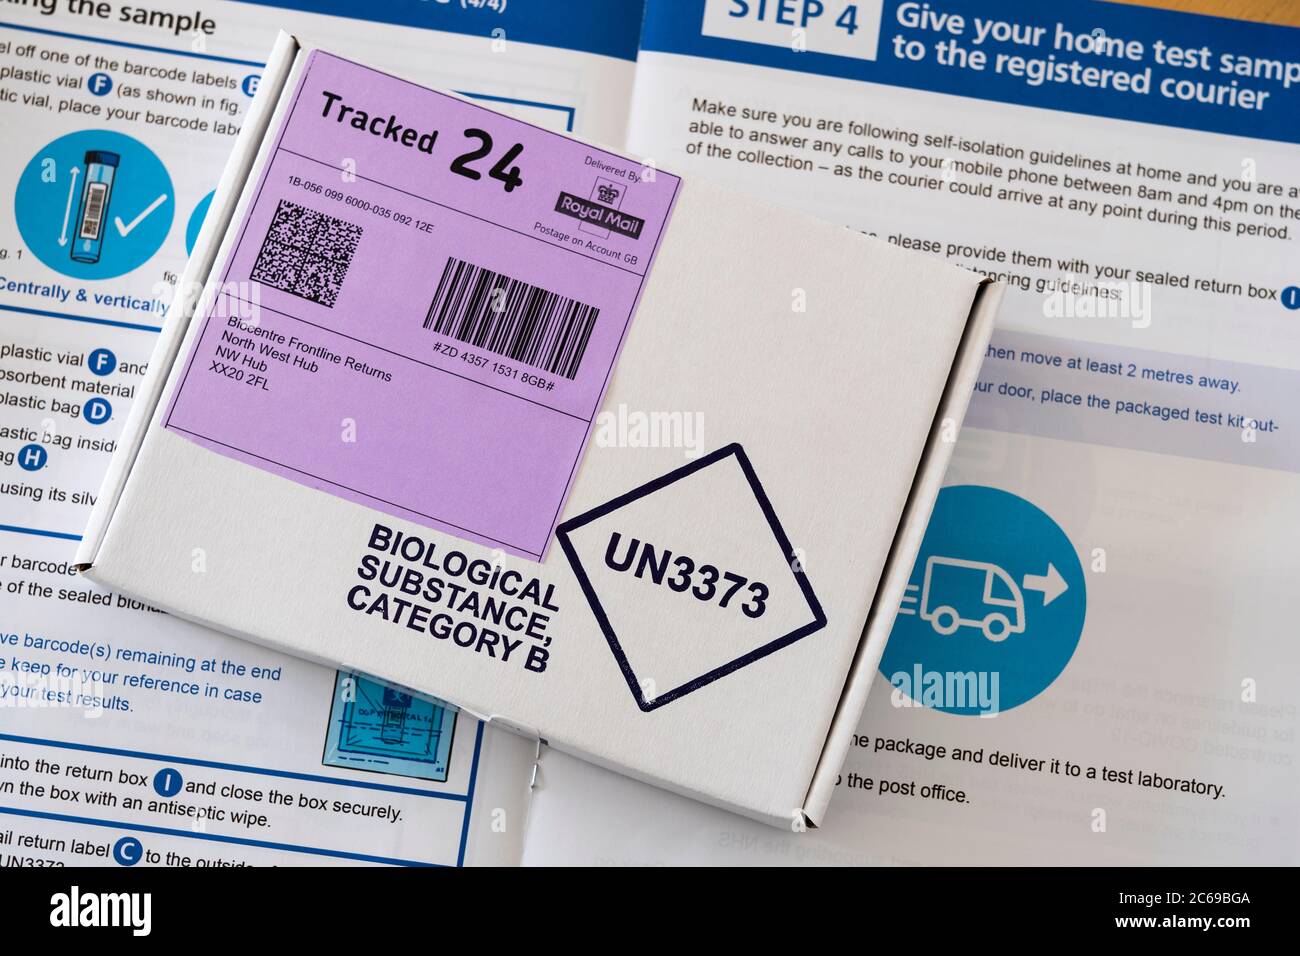 A sealed completed Coronavirus (Covid-19) test in a Biological Substance Category B box on top of instructions for taking a home testing kit, UK Stock Photo